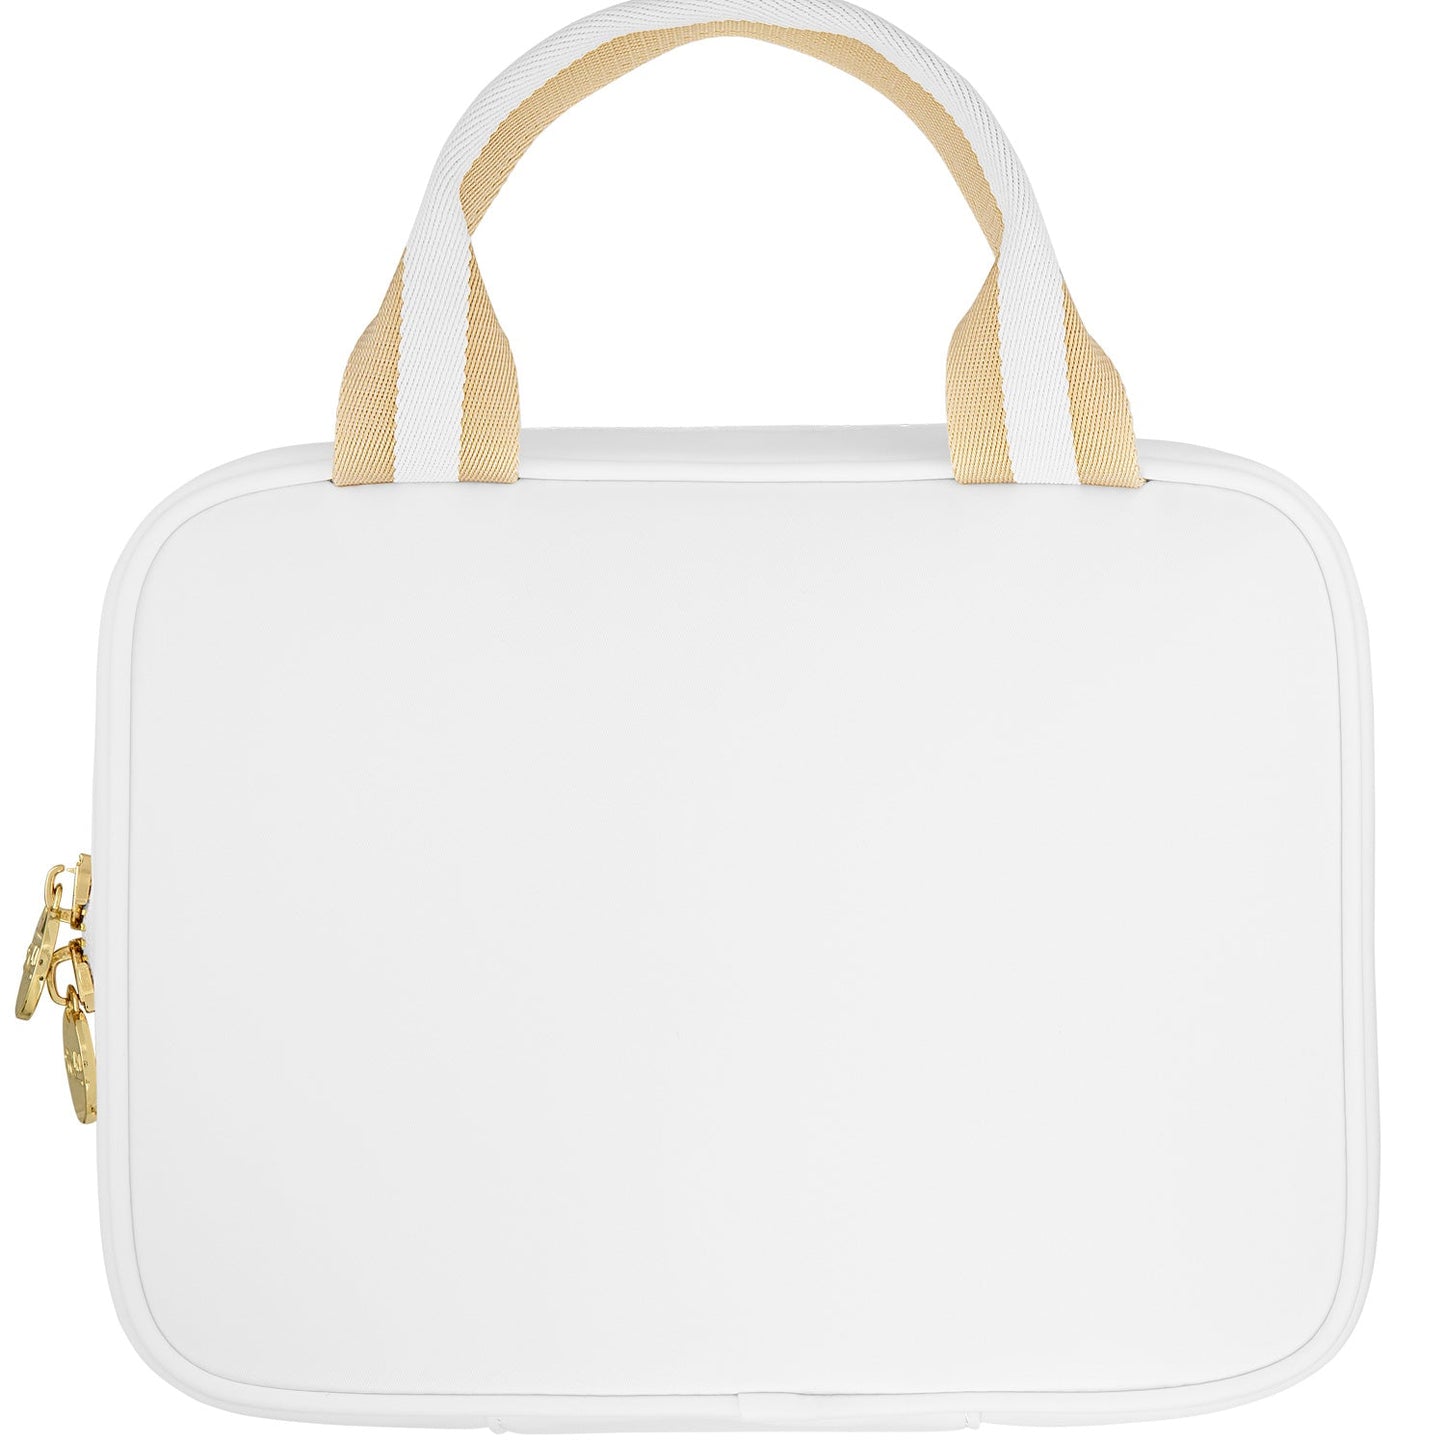 Lunch Tote - Blanc | Stoney Clover Lane